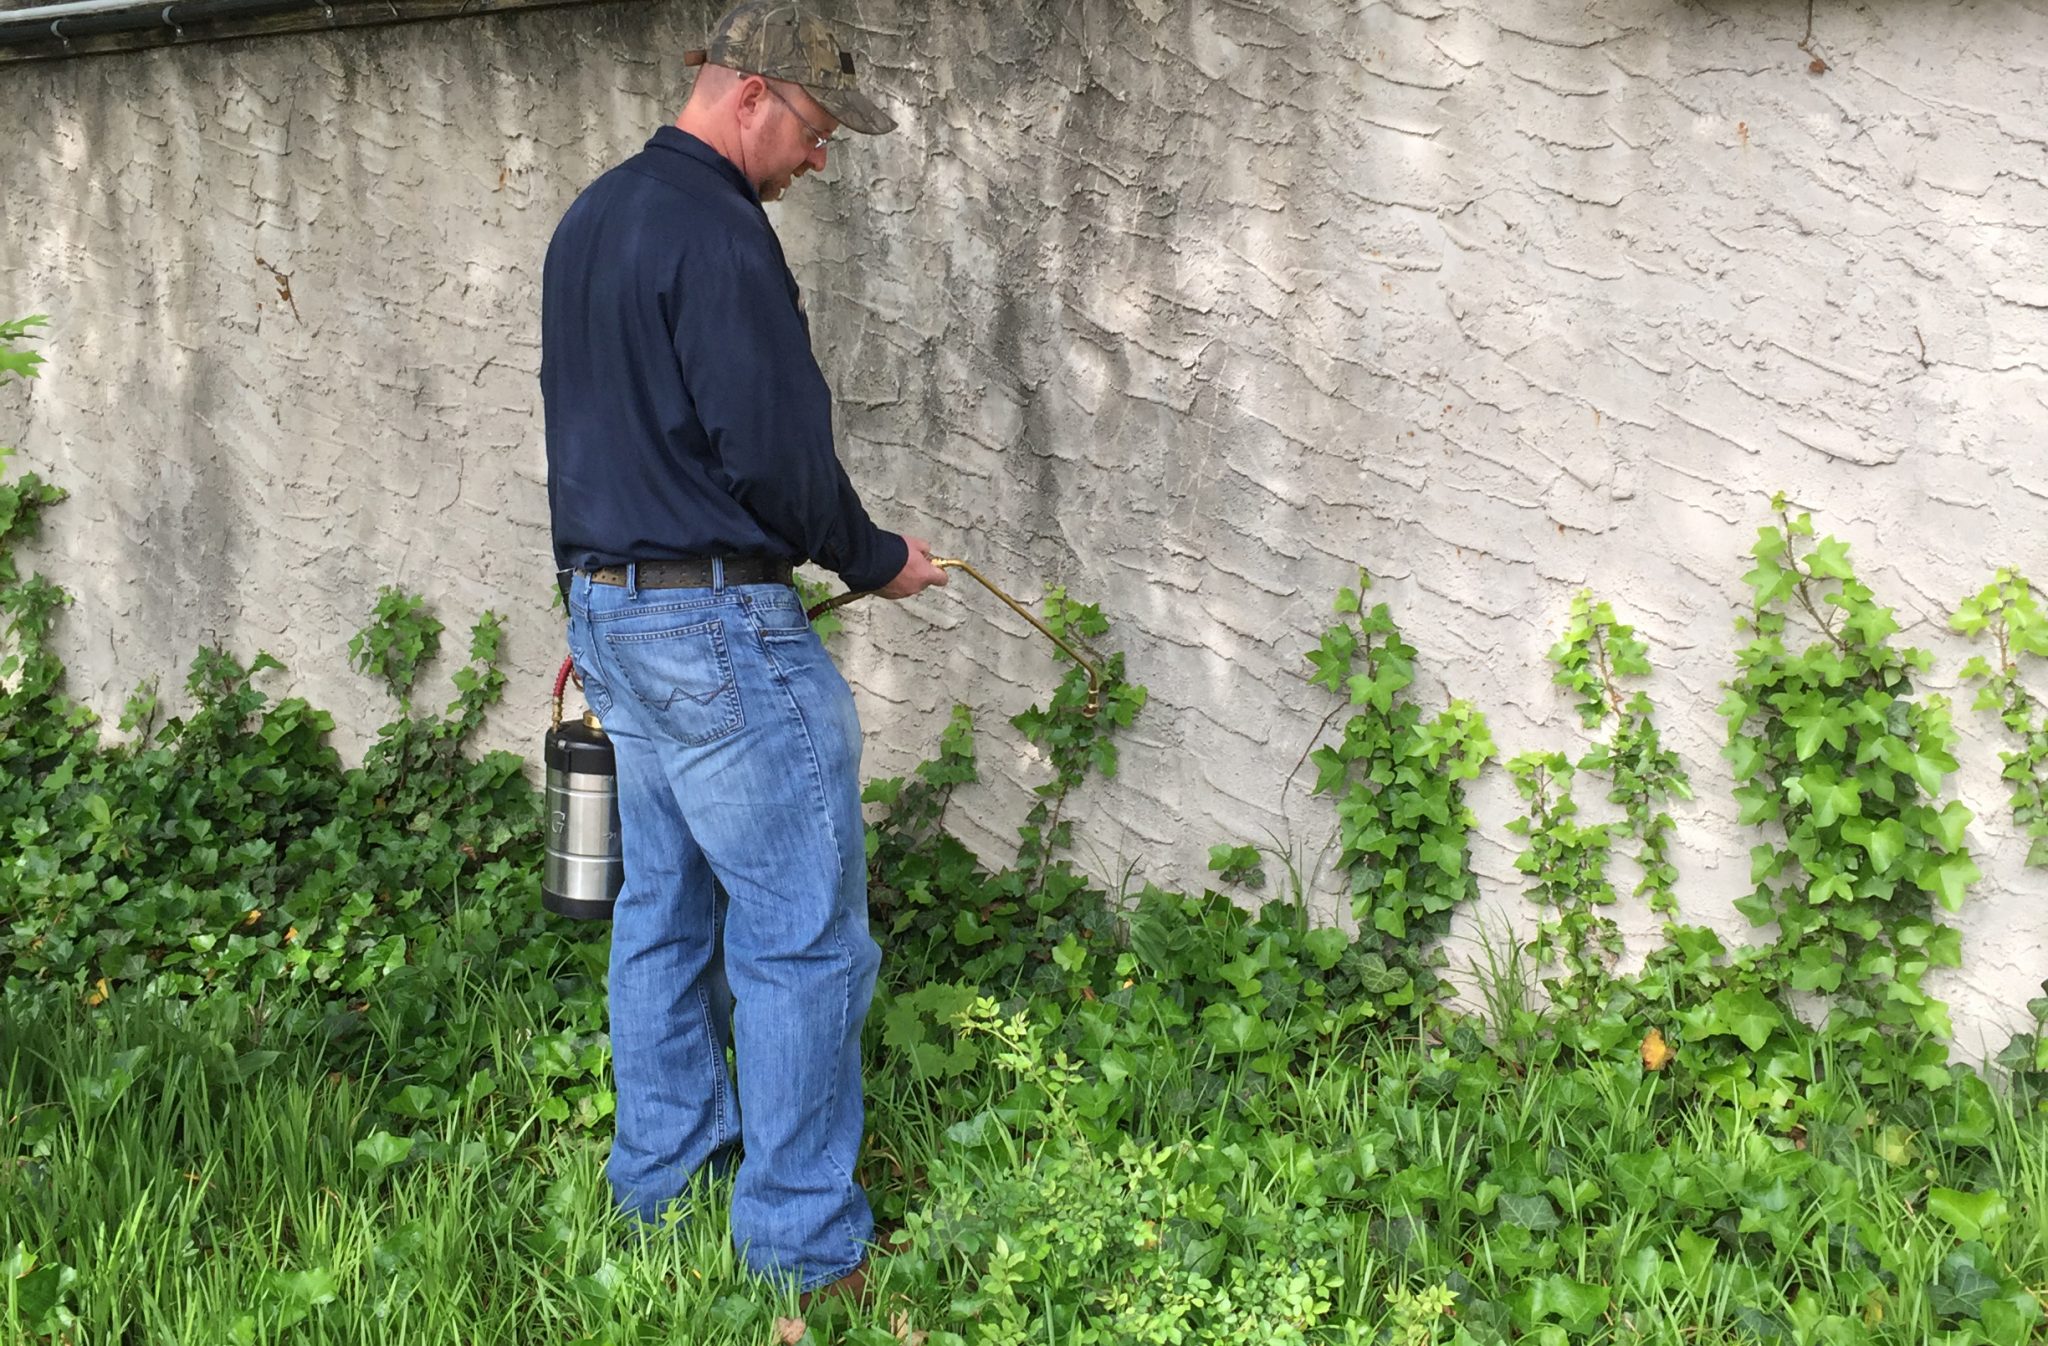 an exterminator is spraying insecticides on yard